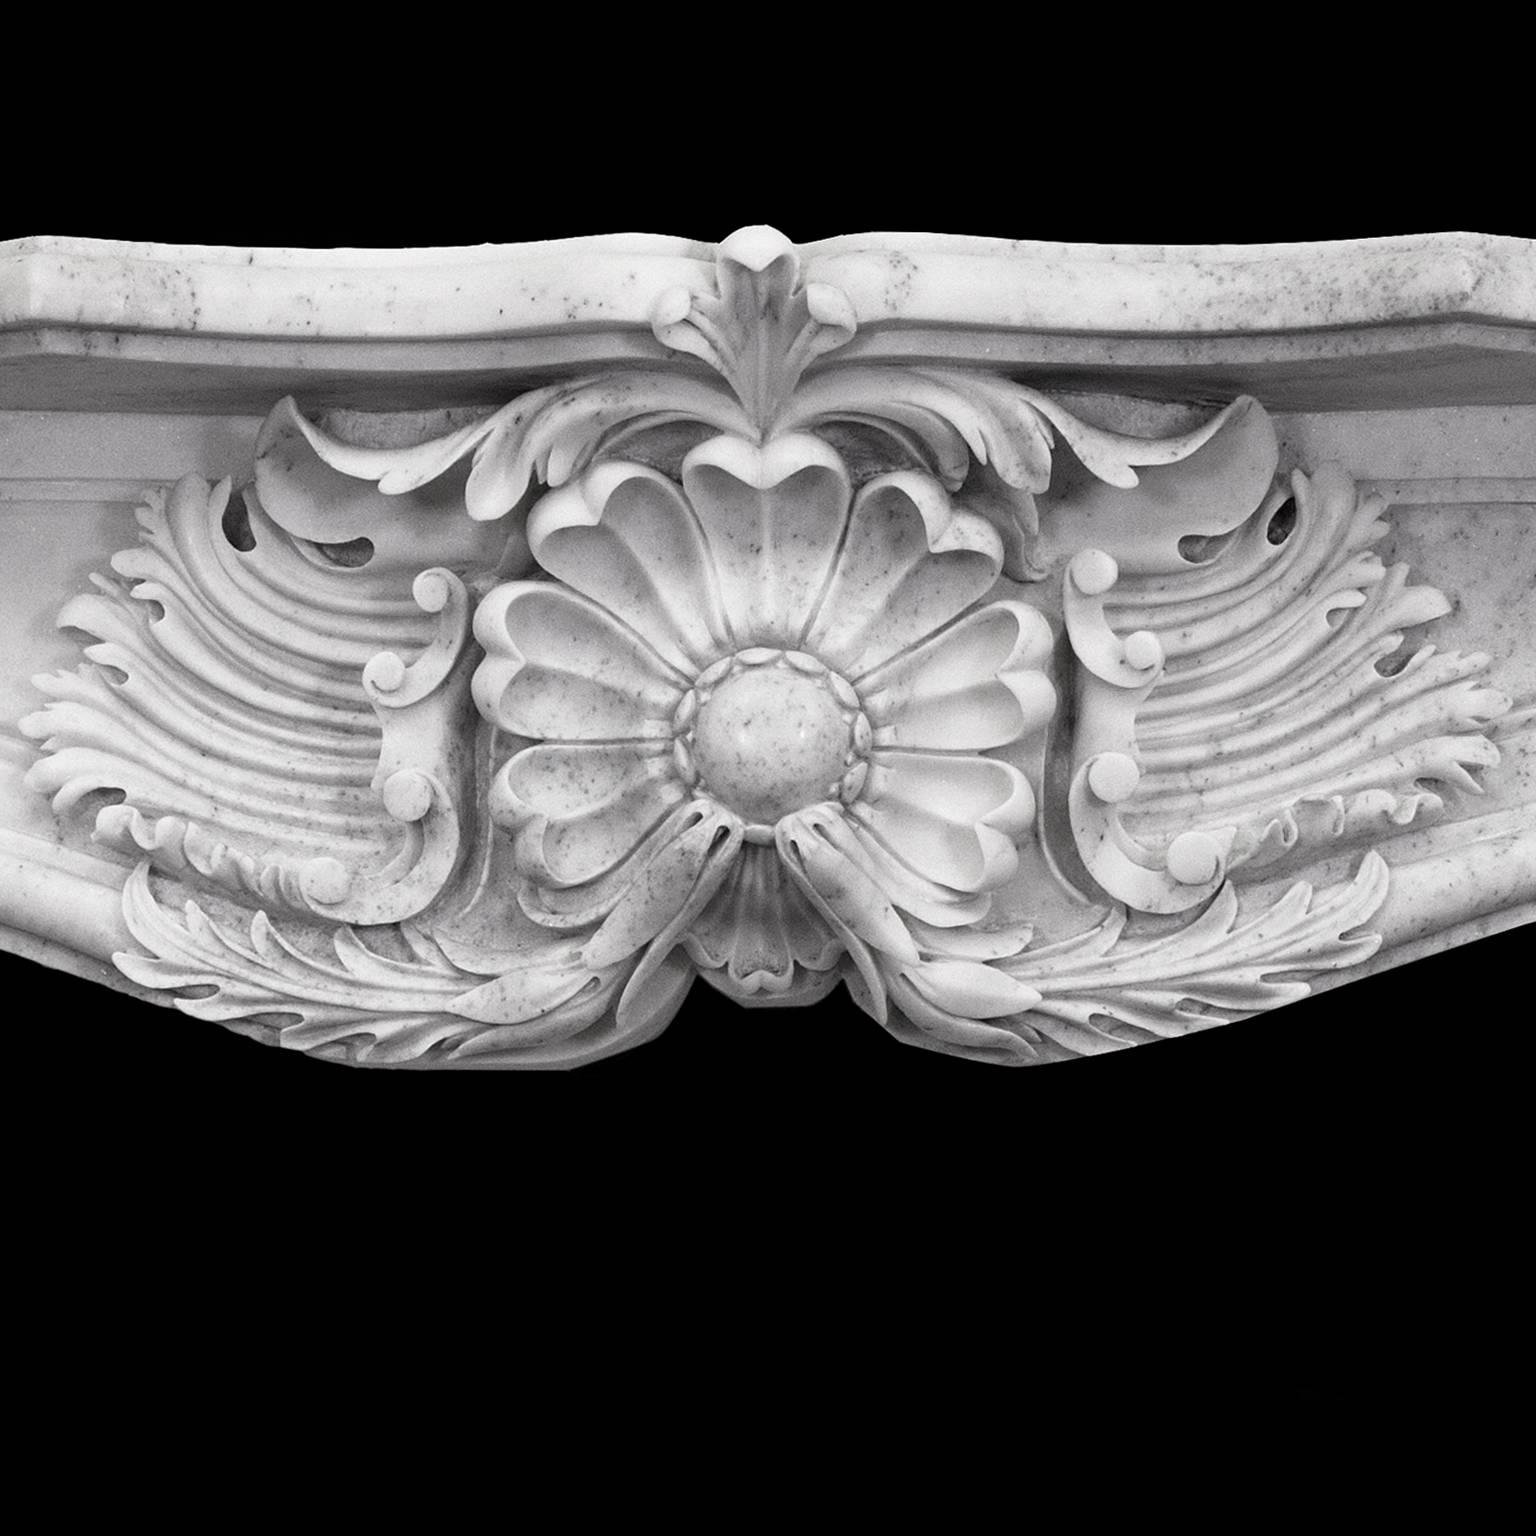 Unique English Rococo Louis style Carrara marble mantel. Impressively hand-carved solid marble fireplace.
Belived to be made late 20th Centrury.

Shelf Width 77